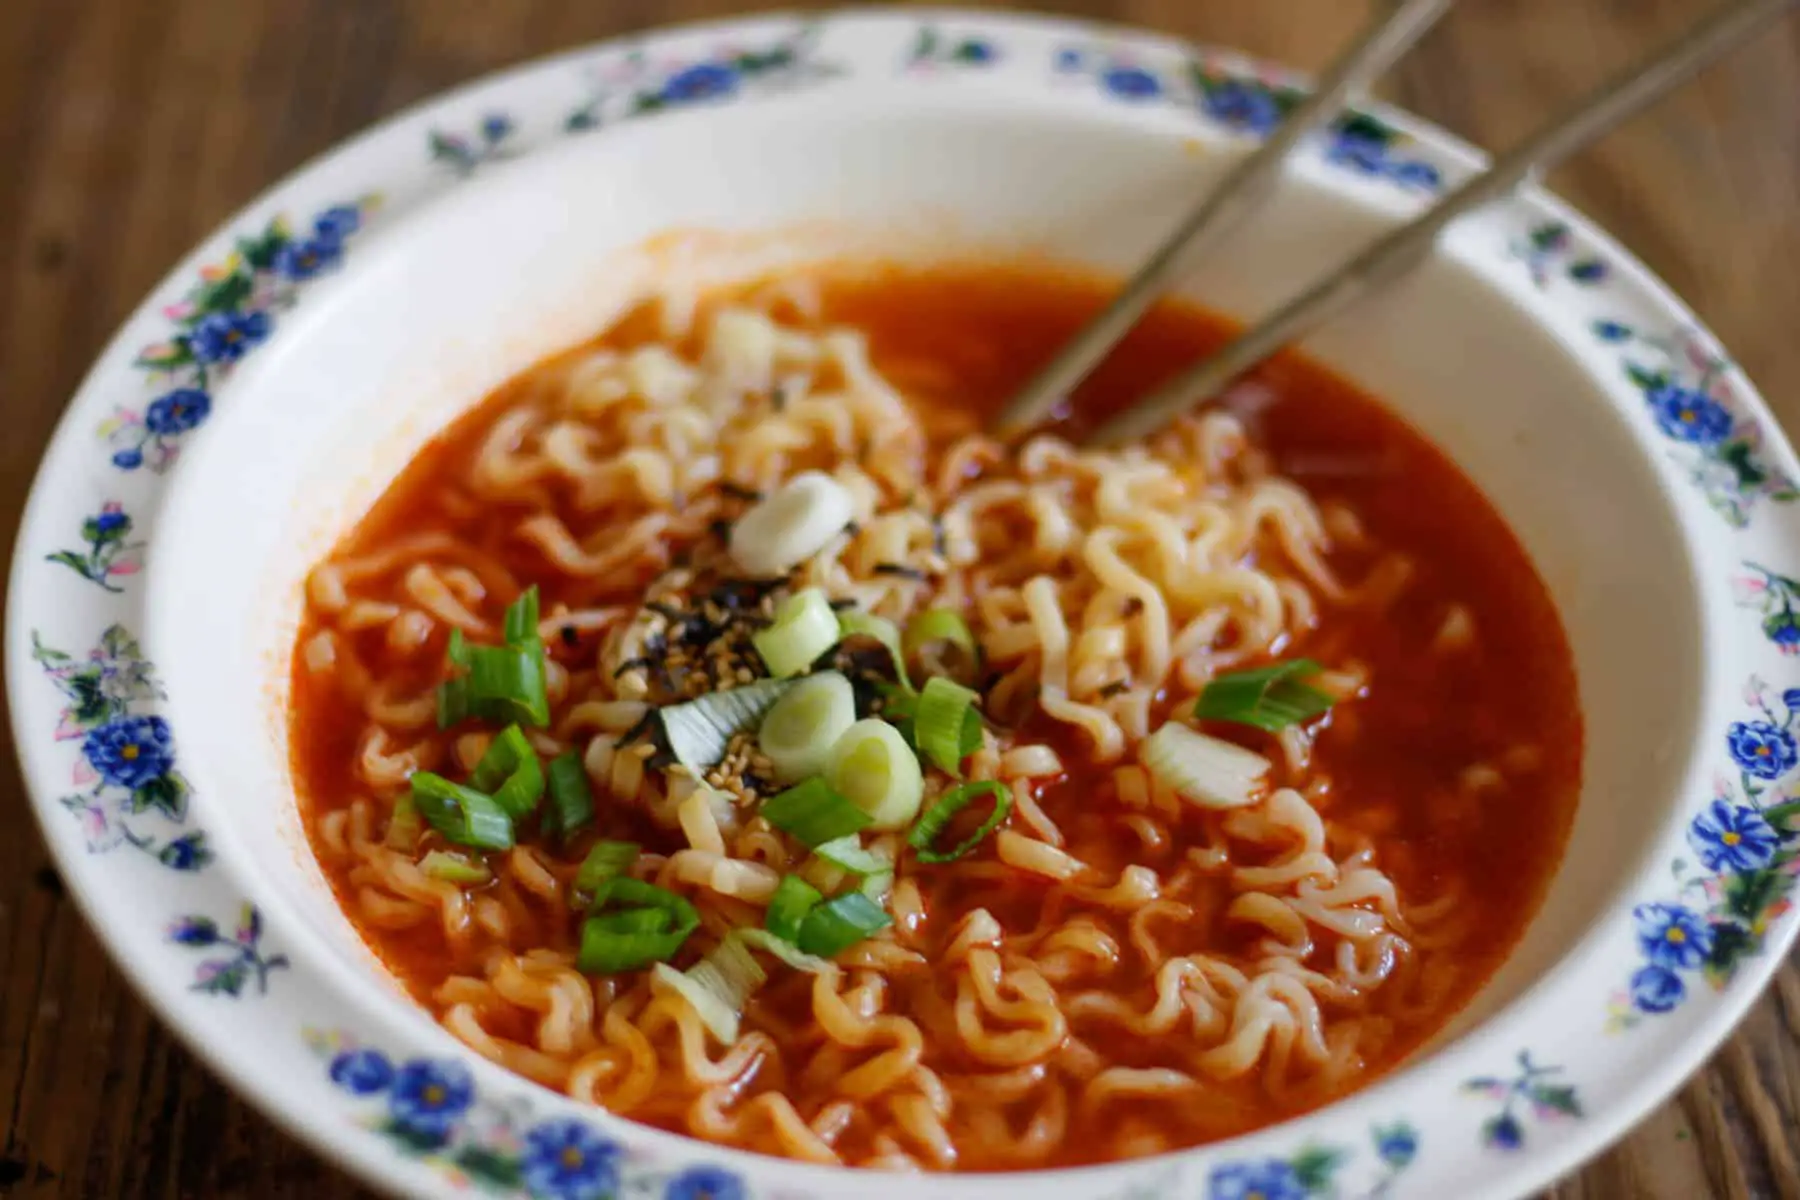 Ramen noodles in a spicy sauce garnished with seaweed, sesame seeds, and green onions in a white bowl patterned with blue flowers and silver chopsticks resting on the bowl.